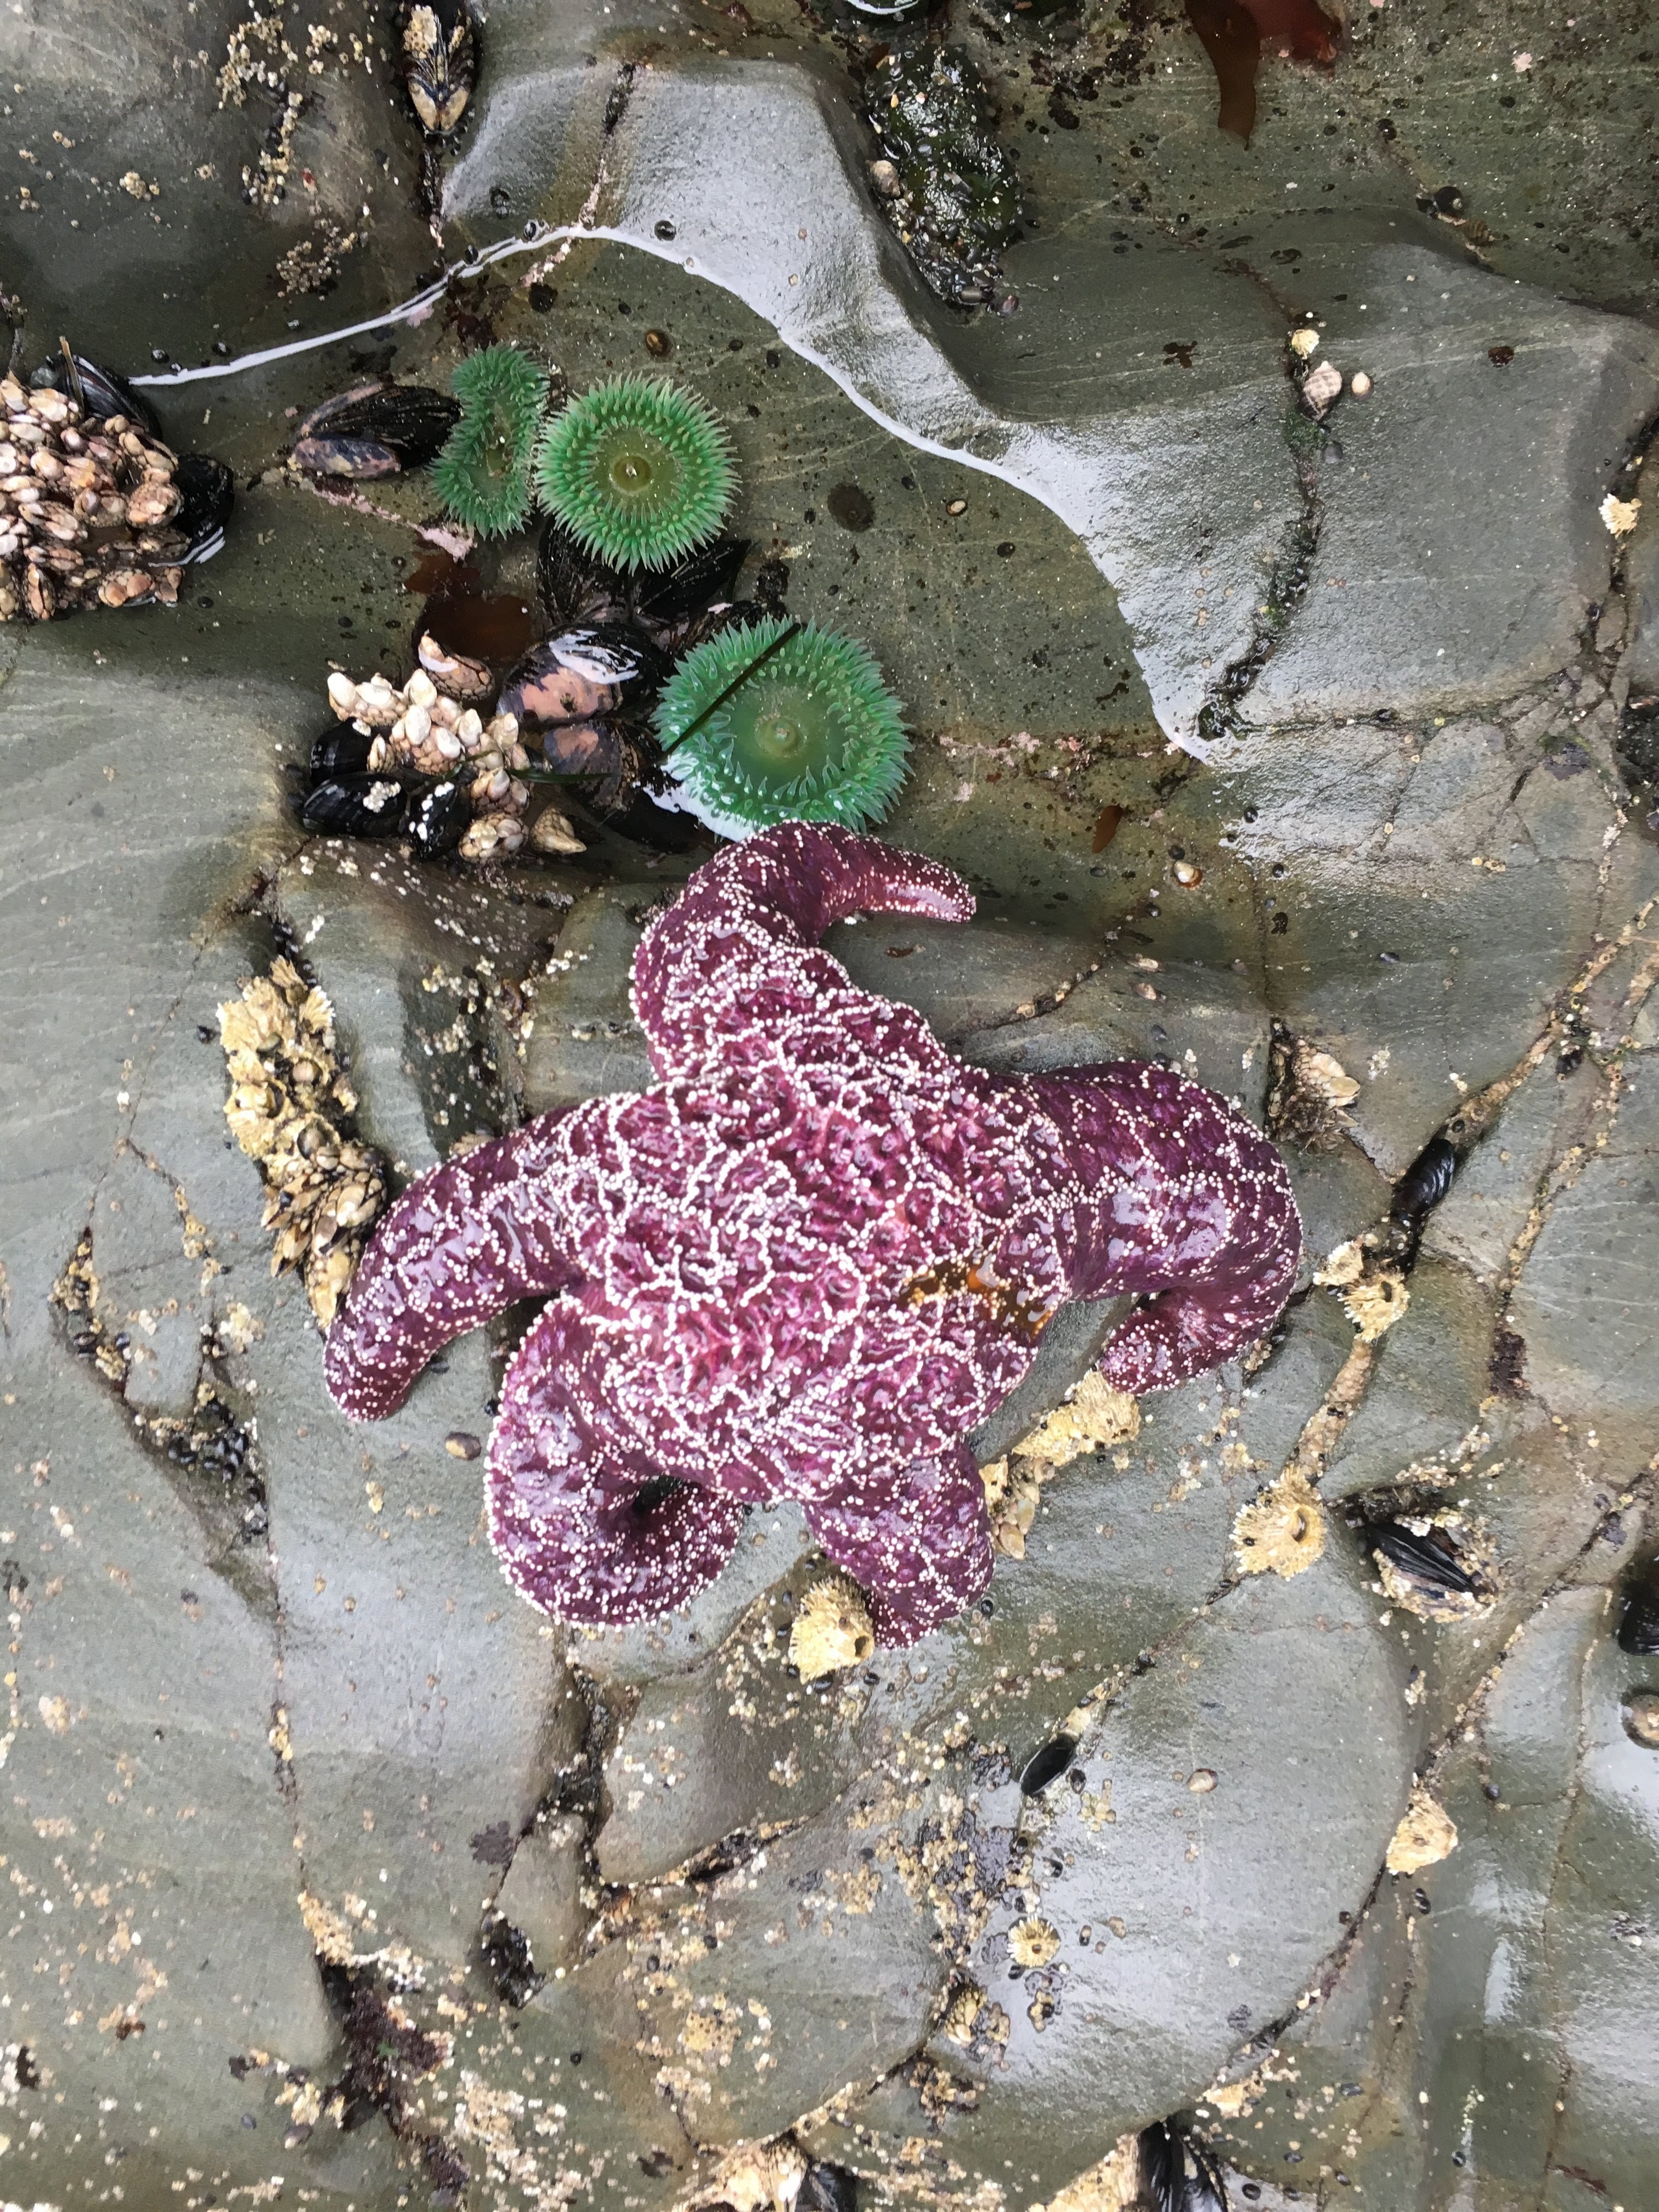 Many sea stars! Or starfishes. Whatever you call them.